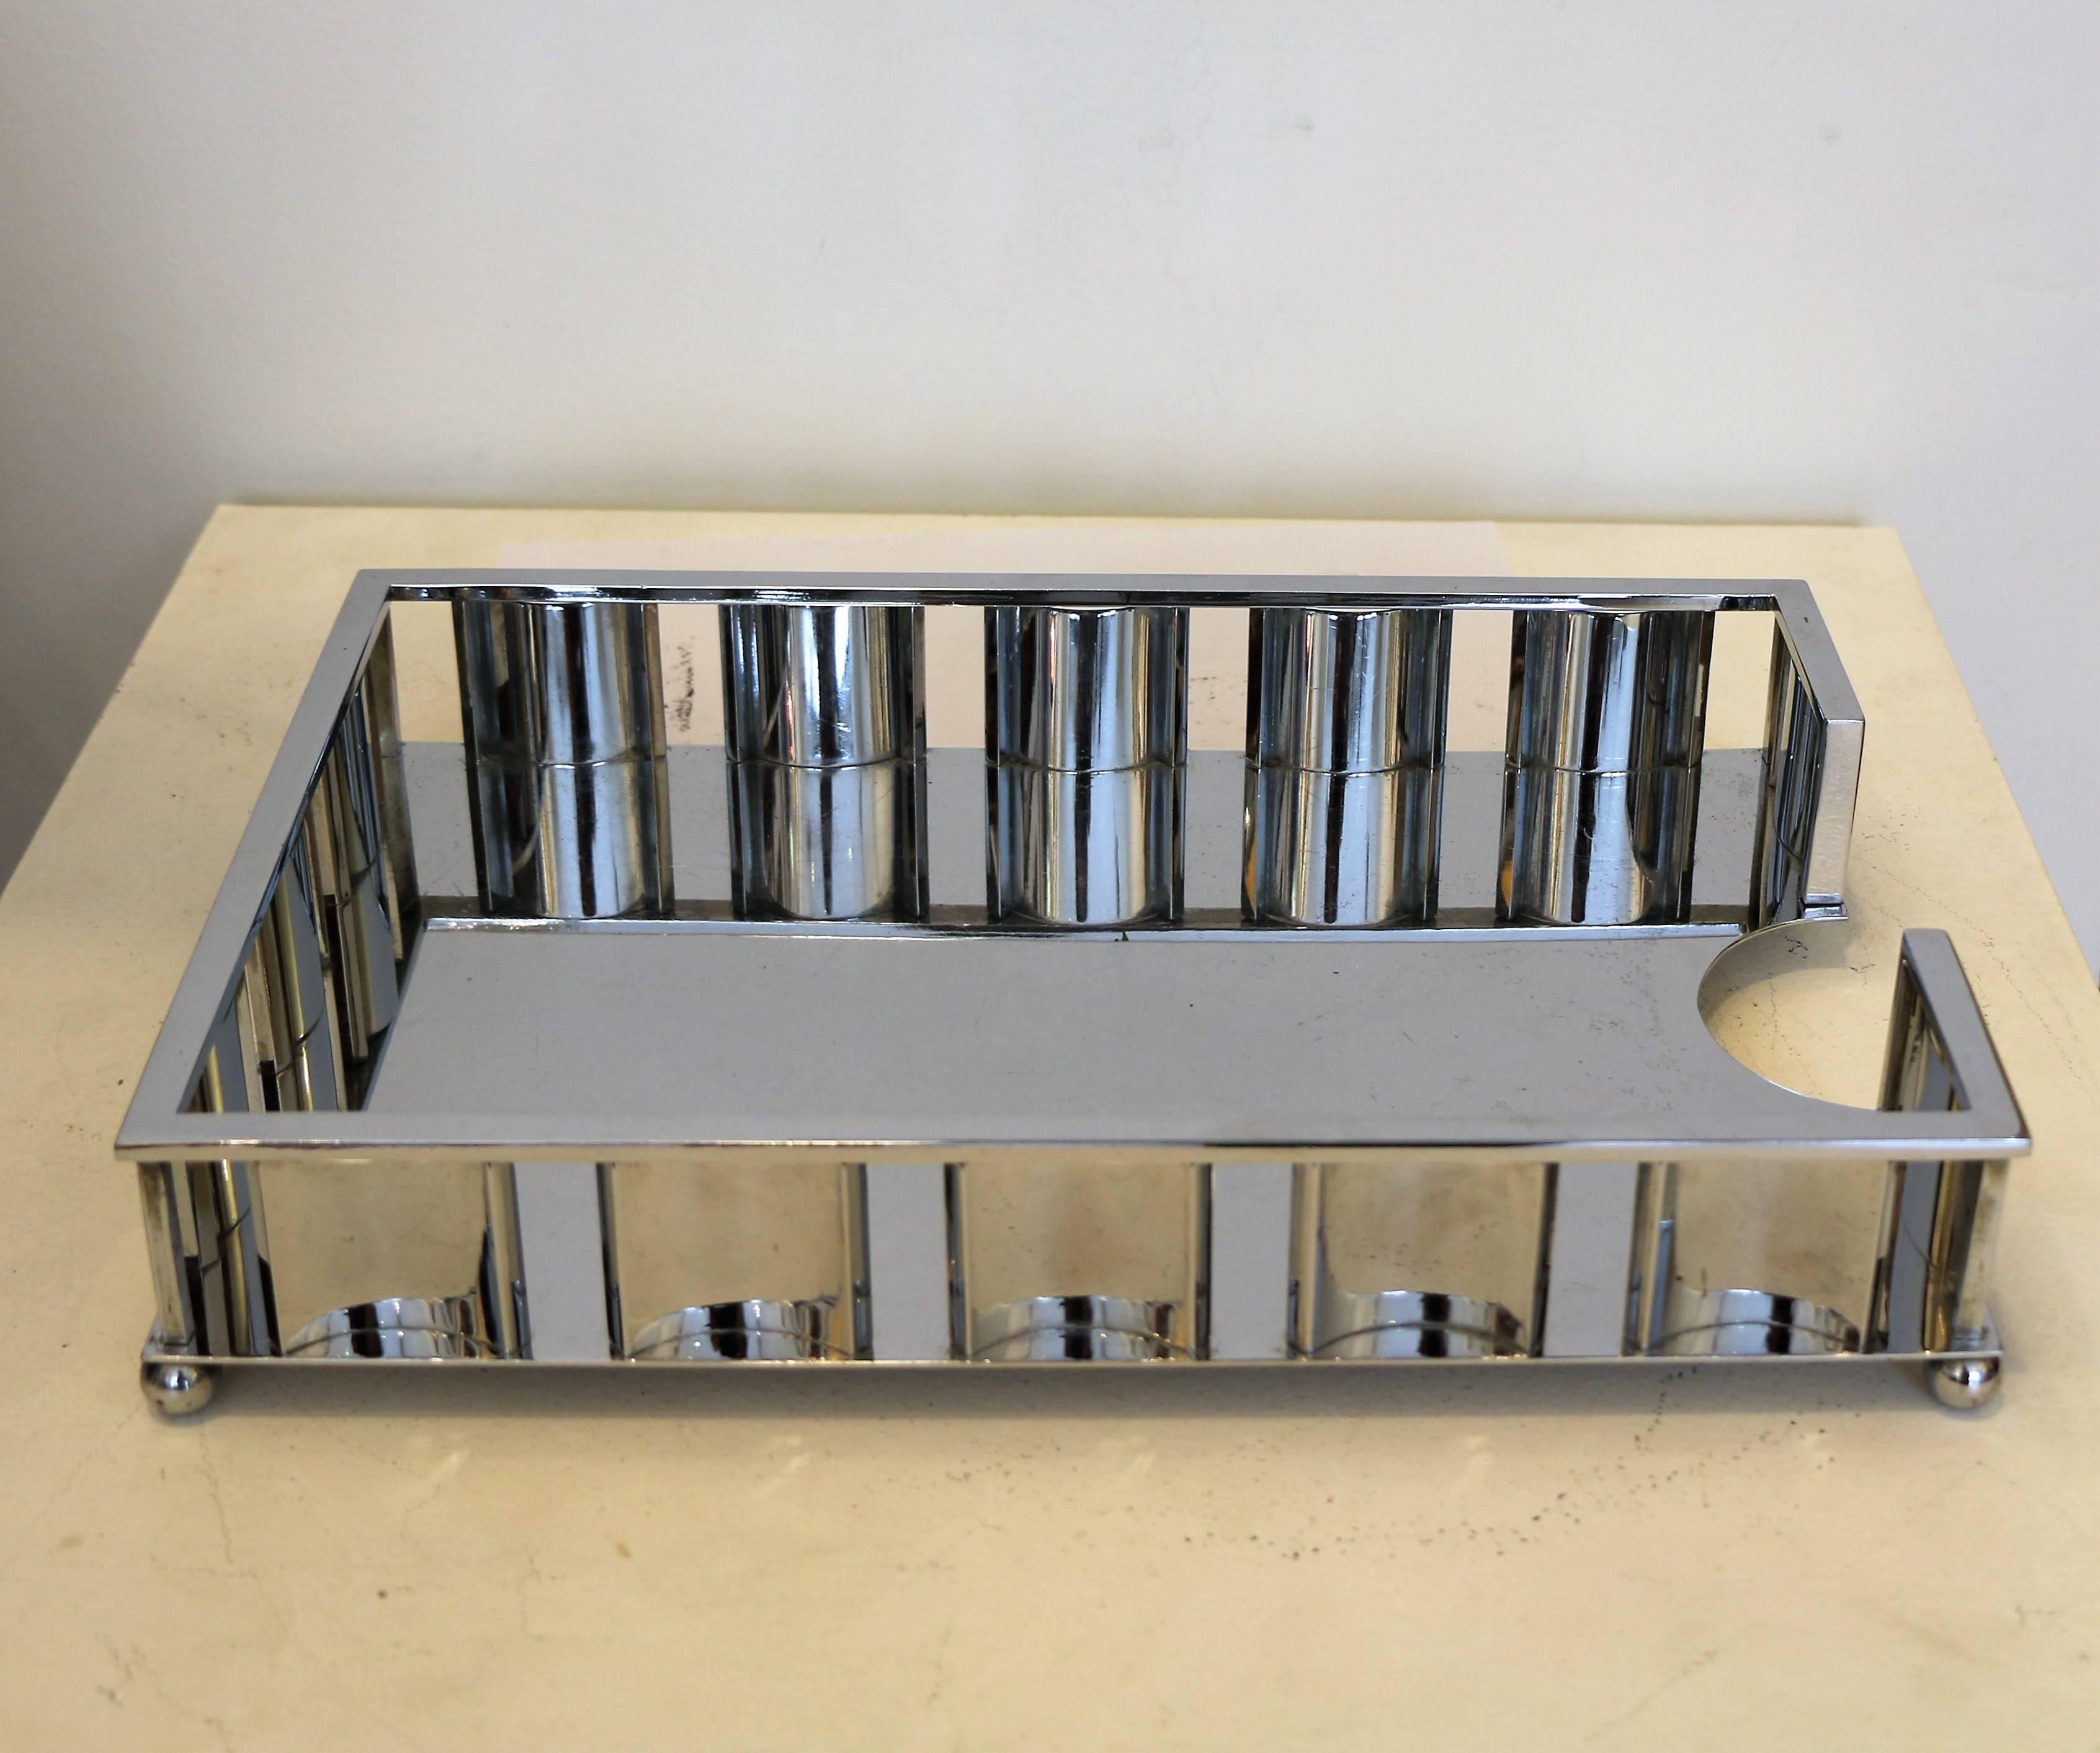 Exceptional letter tray by Jacque Adnet (1900-1984).
Chrome-plated metal, circa 1930. Typical Modernist Art Deco style.
Excellent condition
Referenced in 